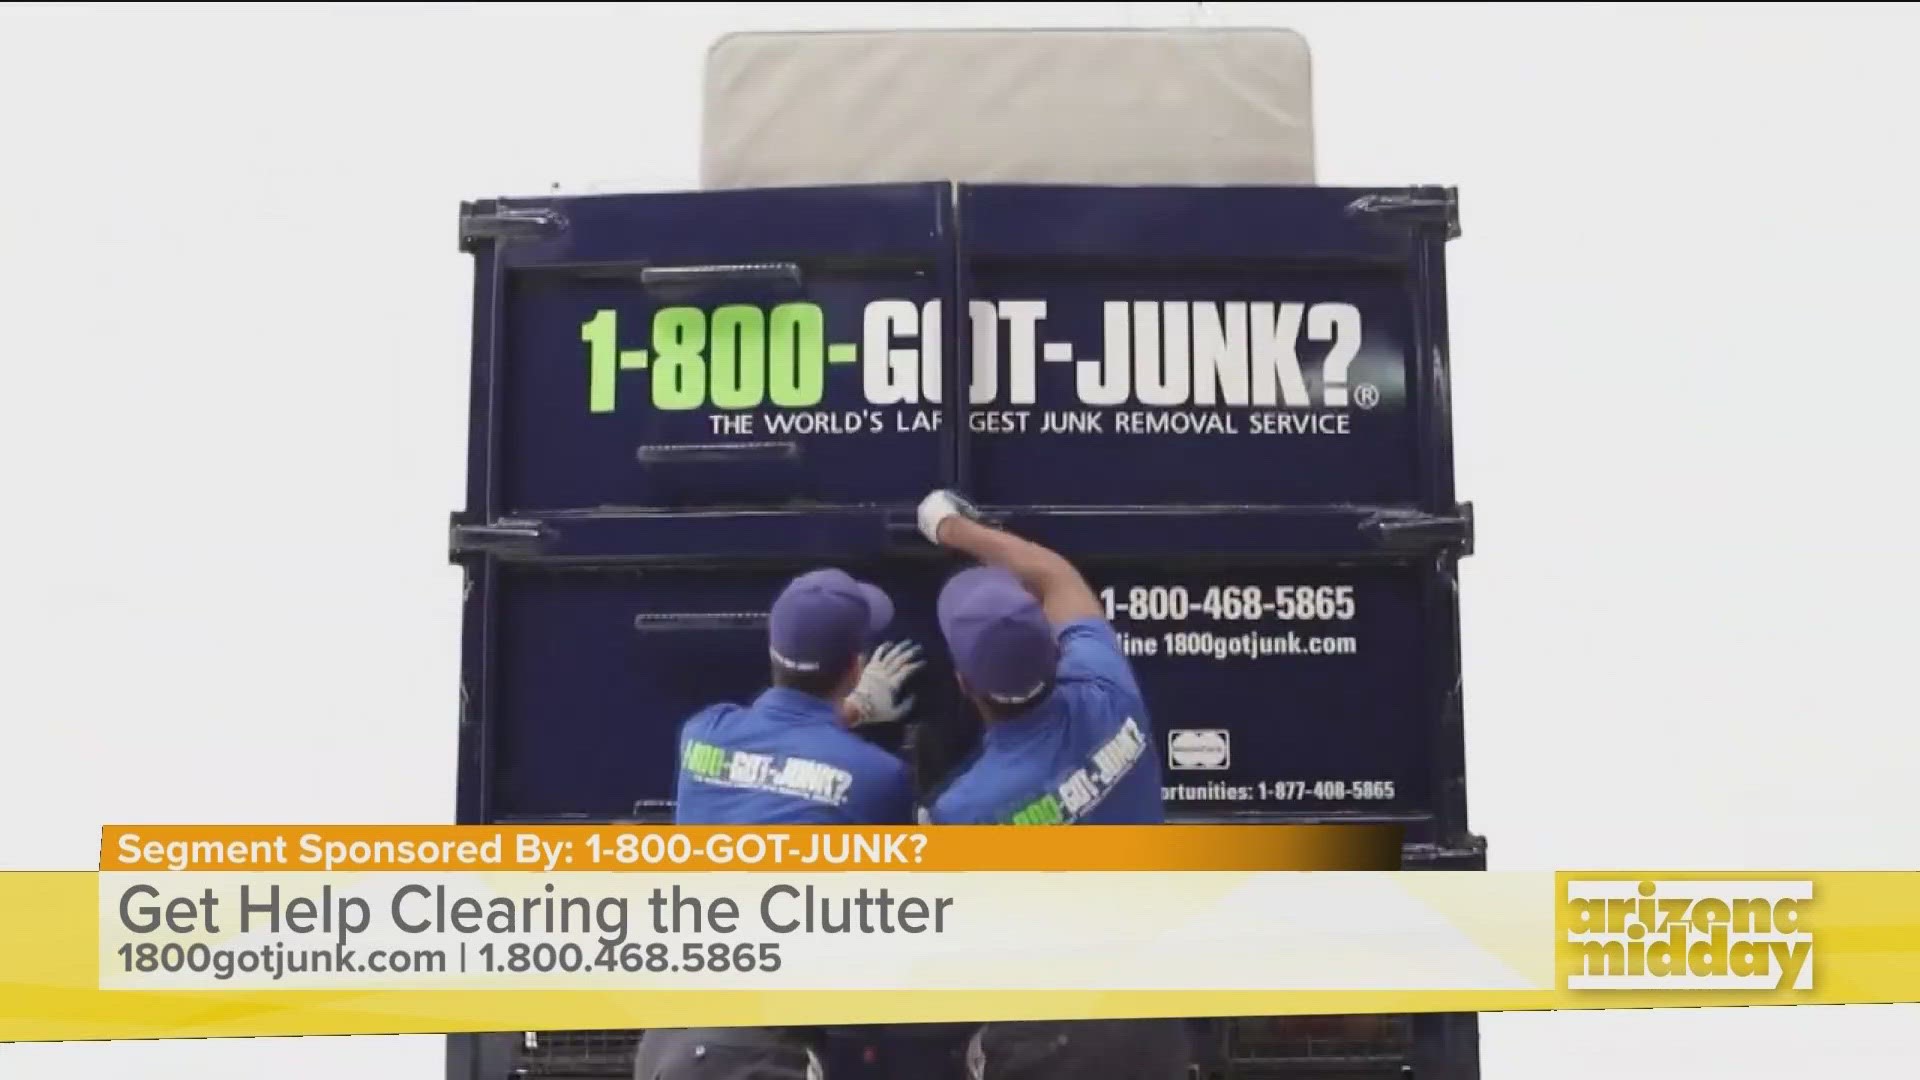 Jeremy Mummert explains how easy it is to book 1-800-GOT-JUNK to remove unwanted items from your home or business.